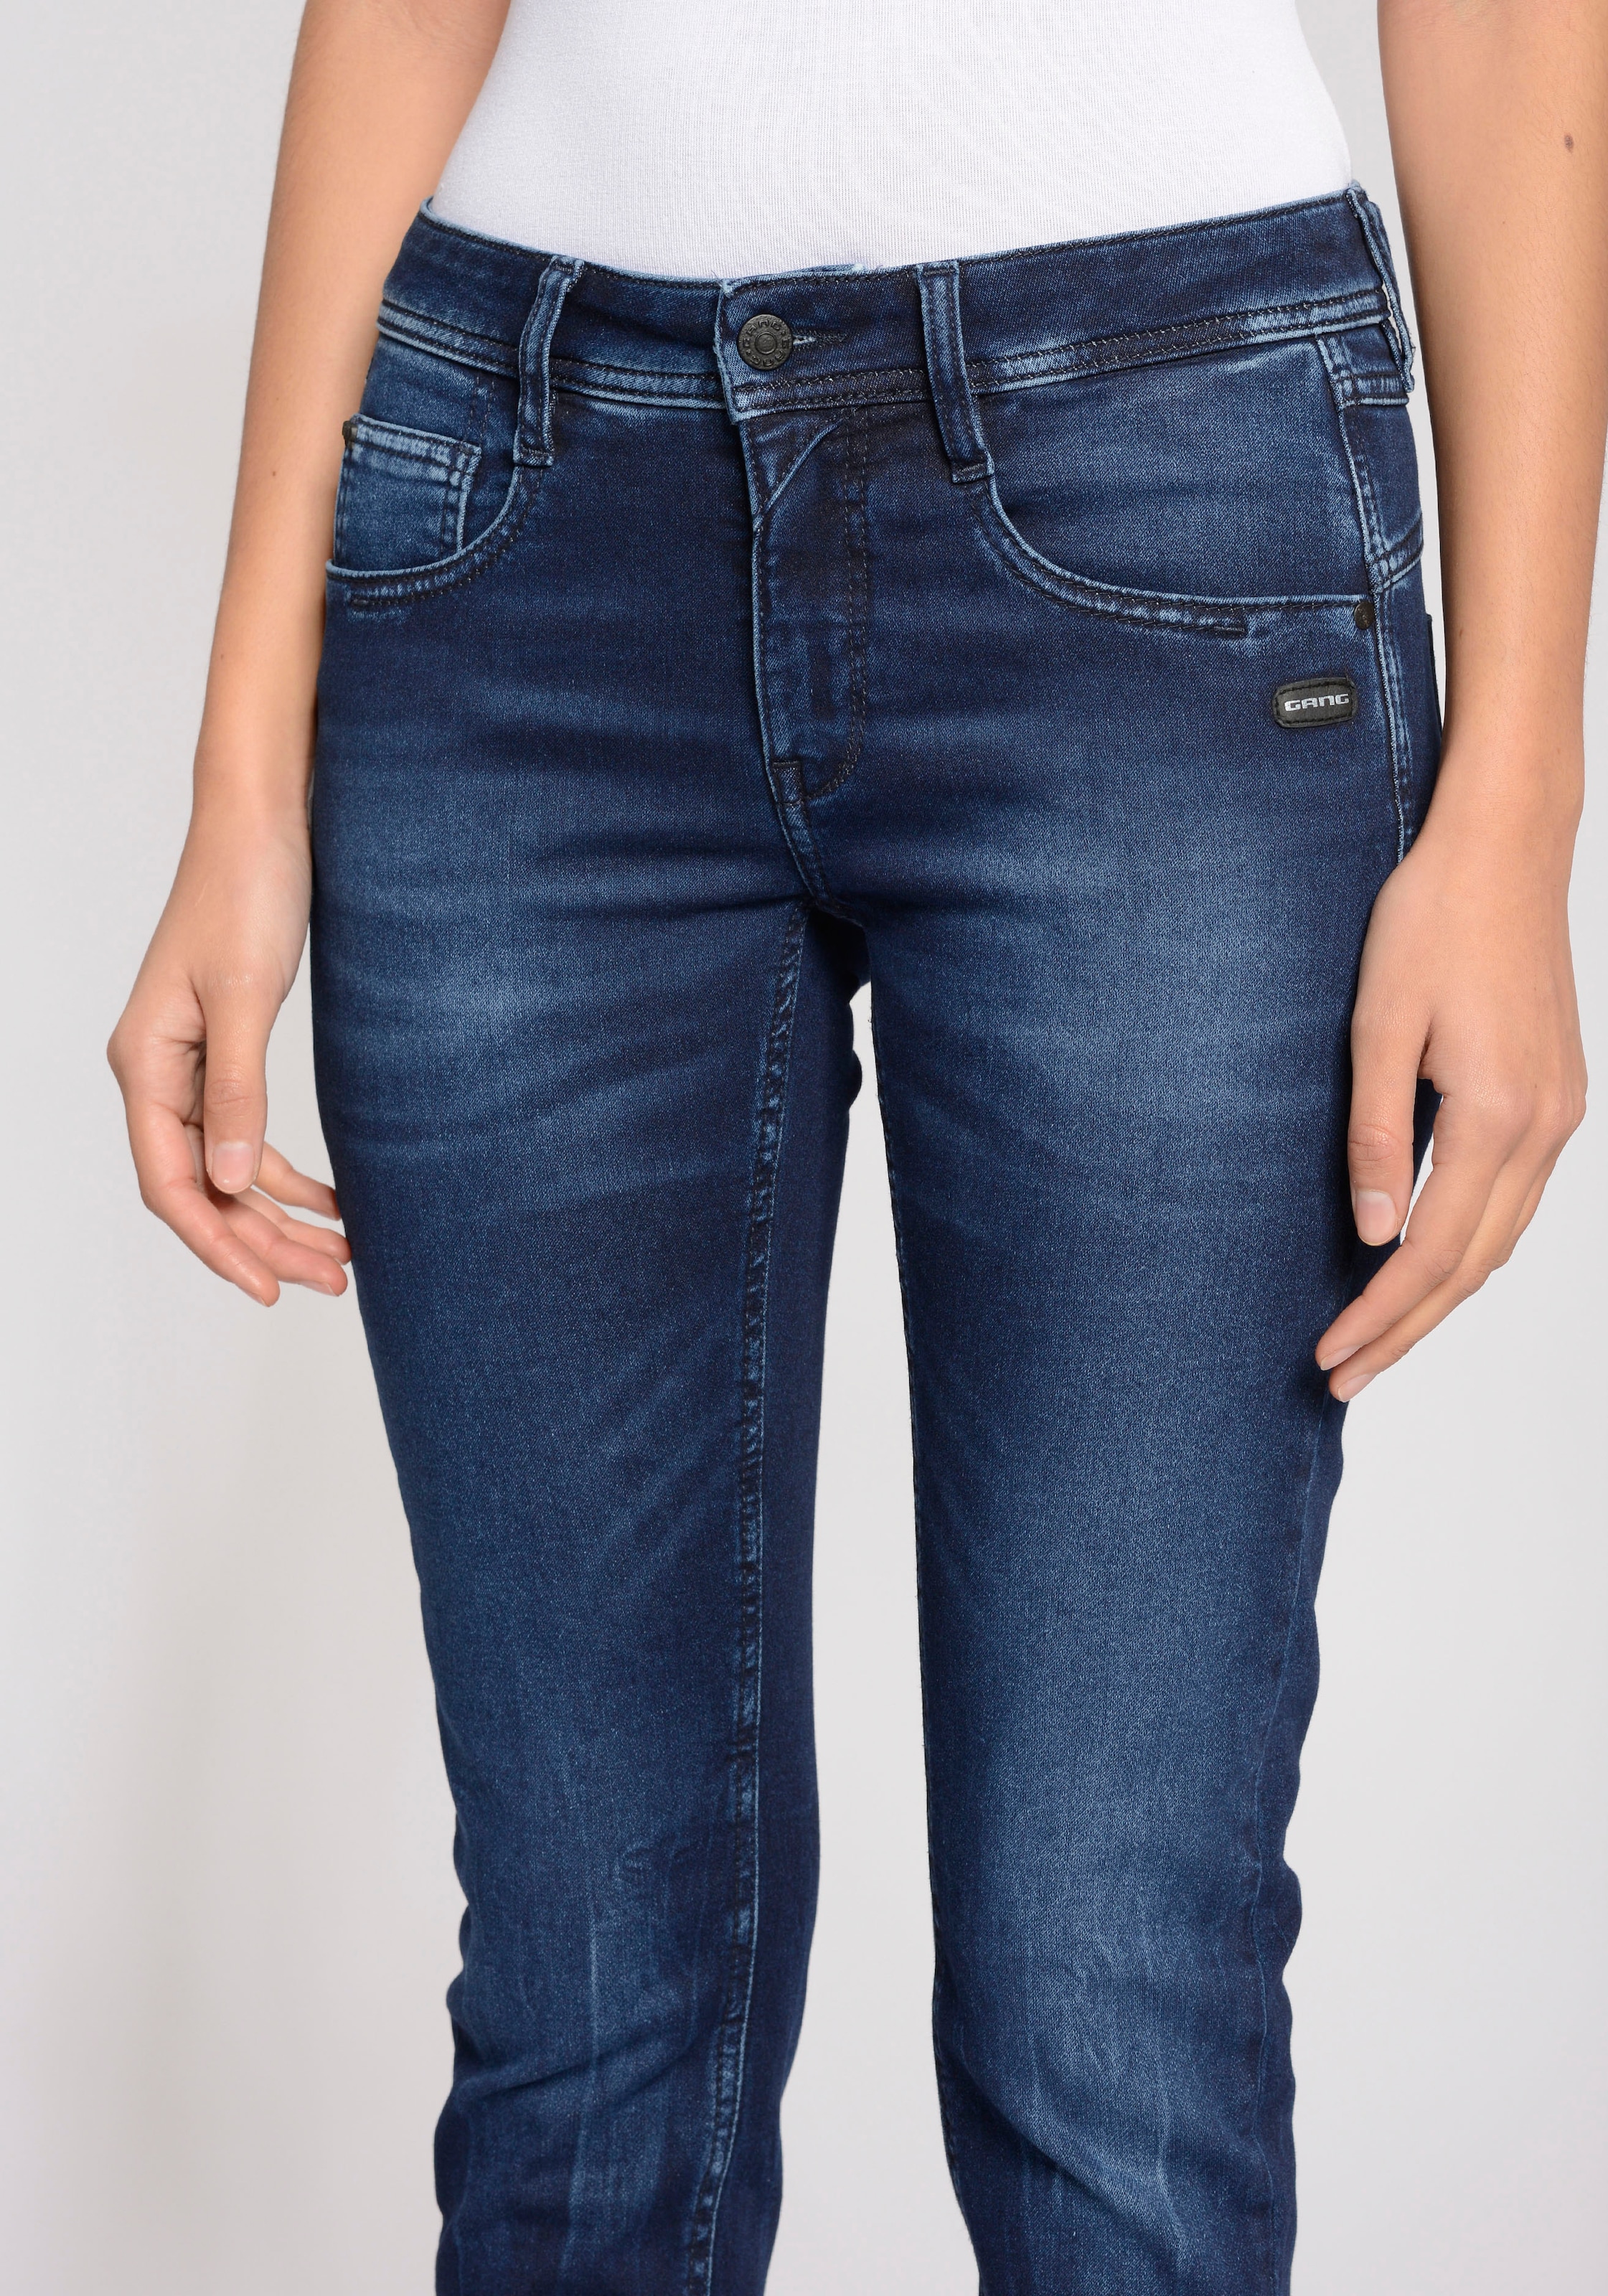 OTTO Relax-fit-Jeans »94Amelie Cropped« GANG kaufen bei